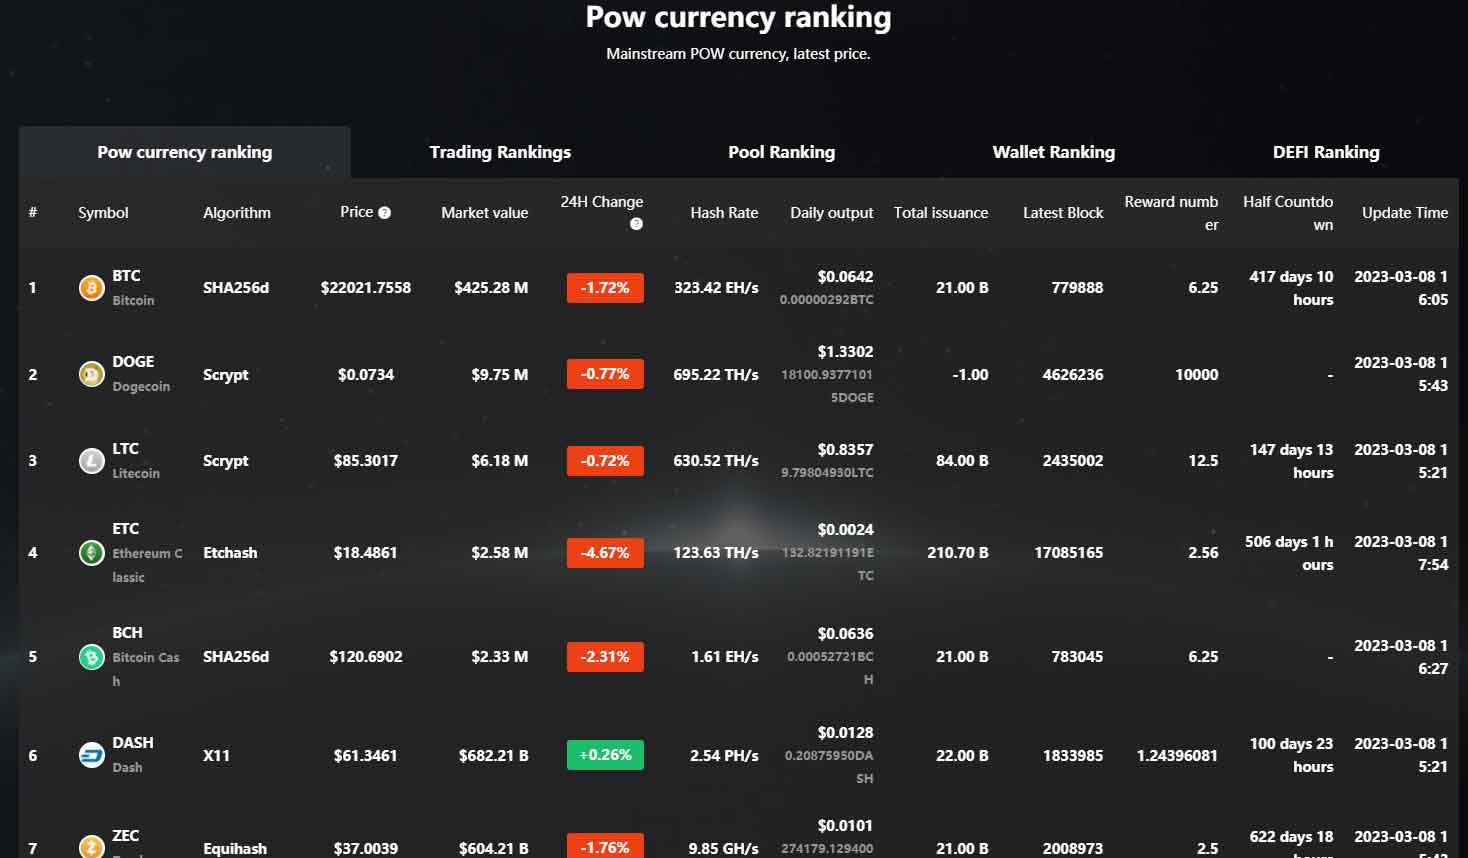 Pow currency ranking